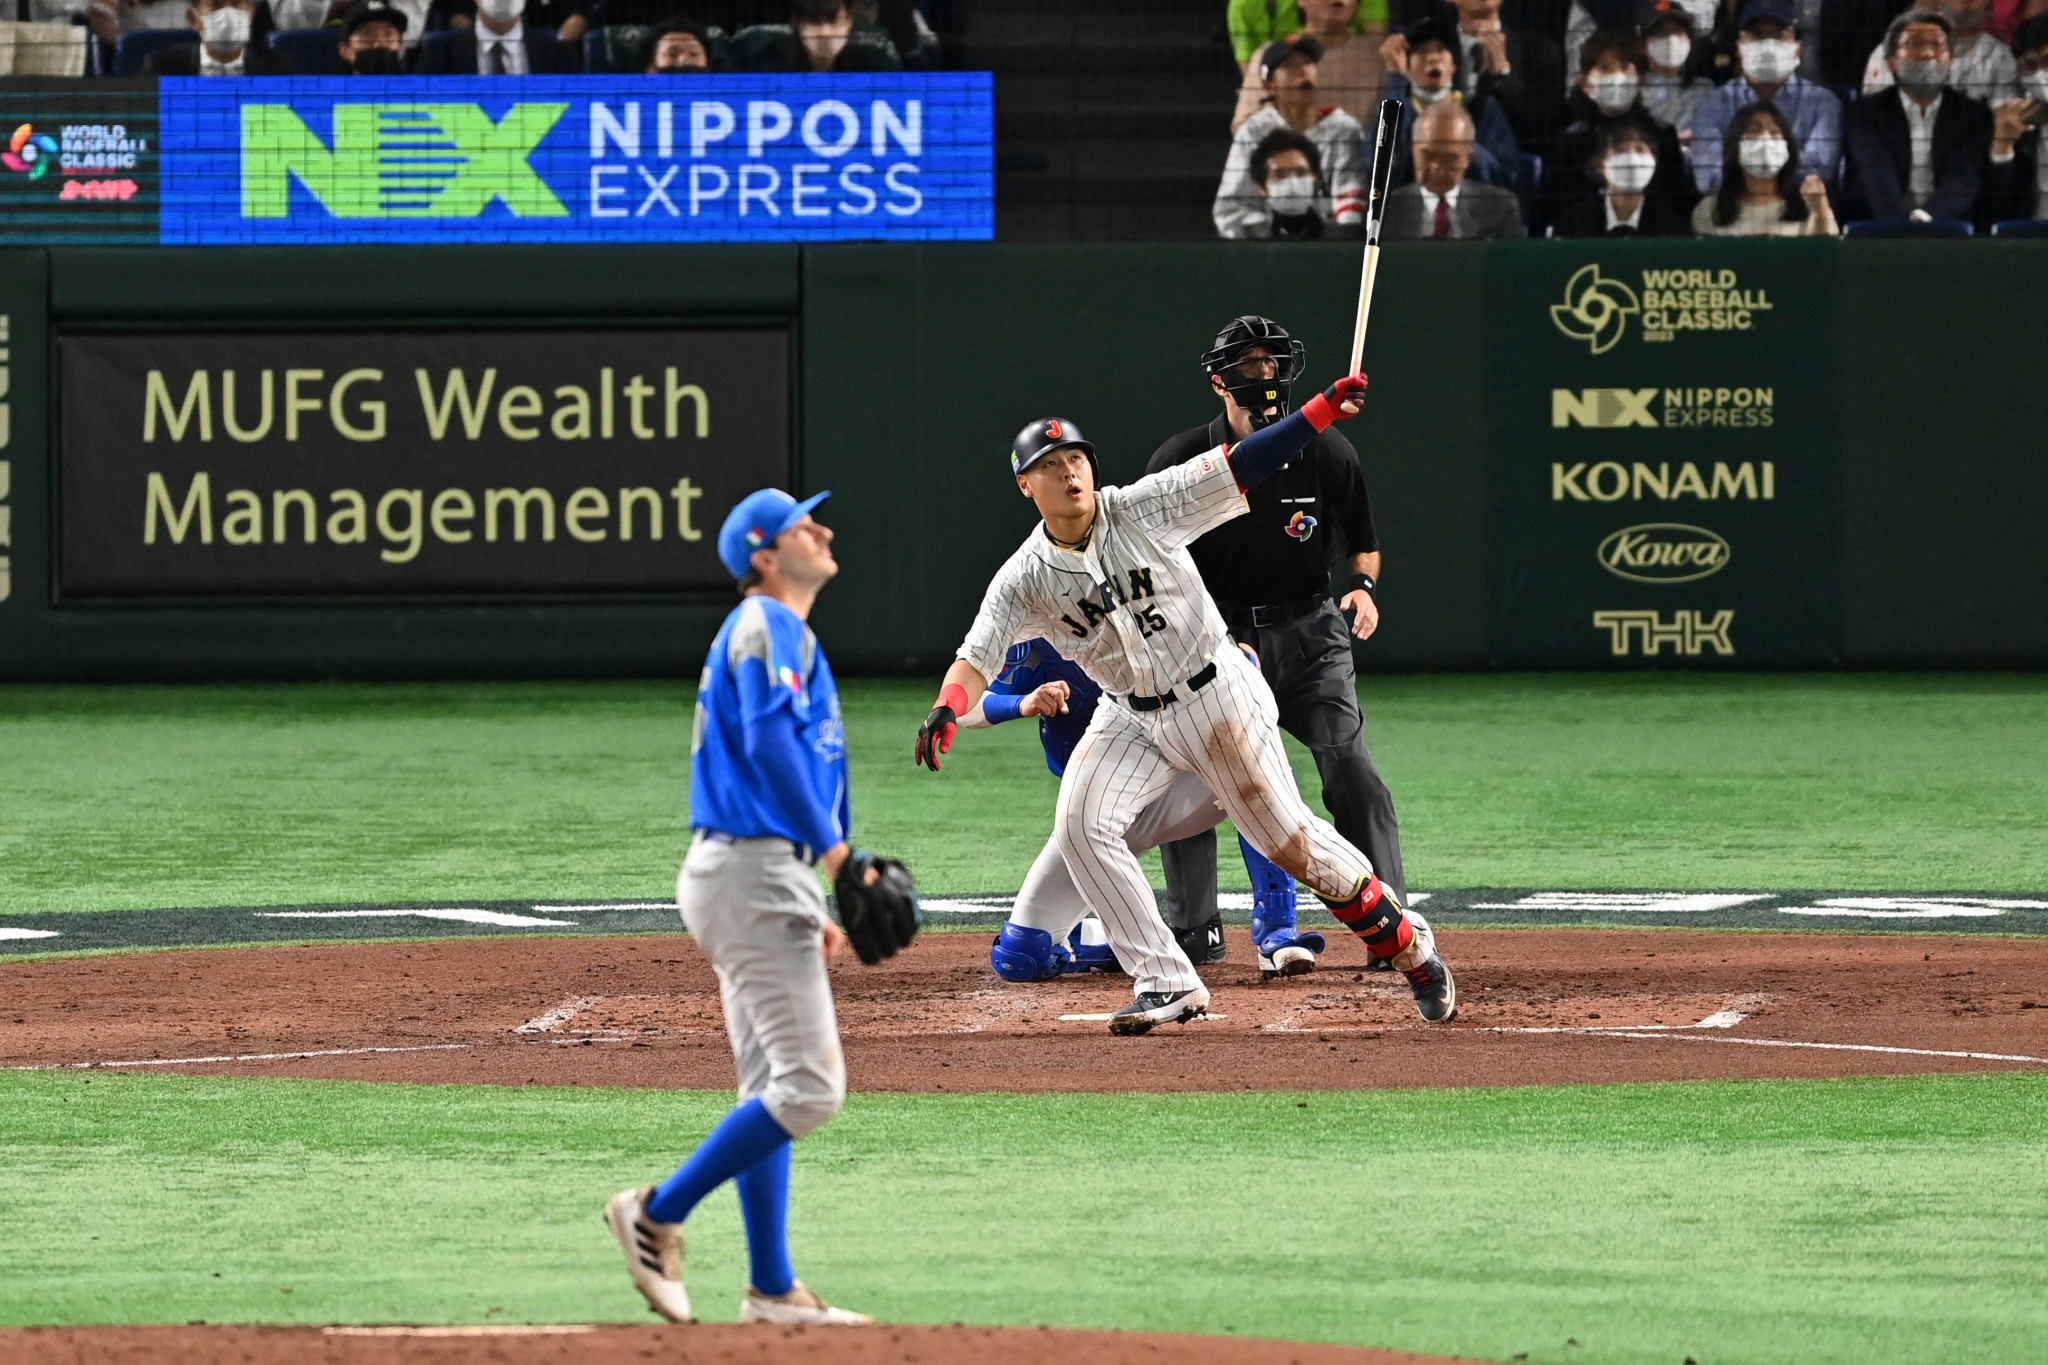 Japan will face Mexico in the semi-final of the World Baseball Classic after defeating Italy 9-3 at the Tokyo Dome ©Getty Images